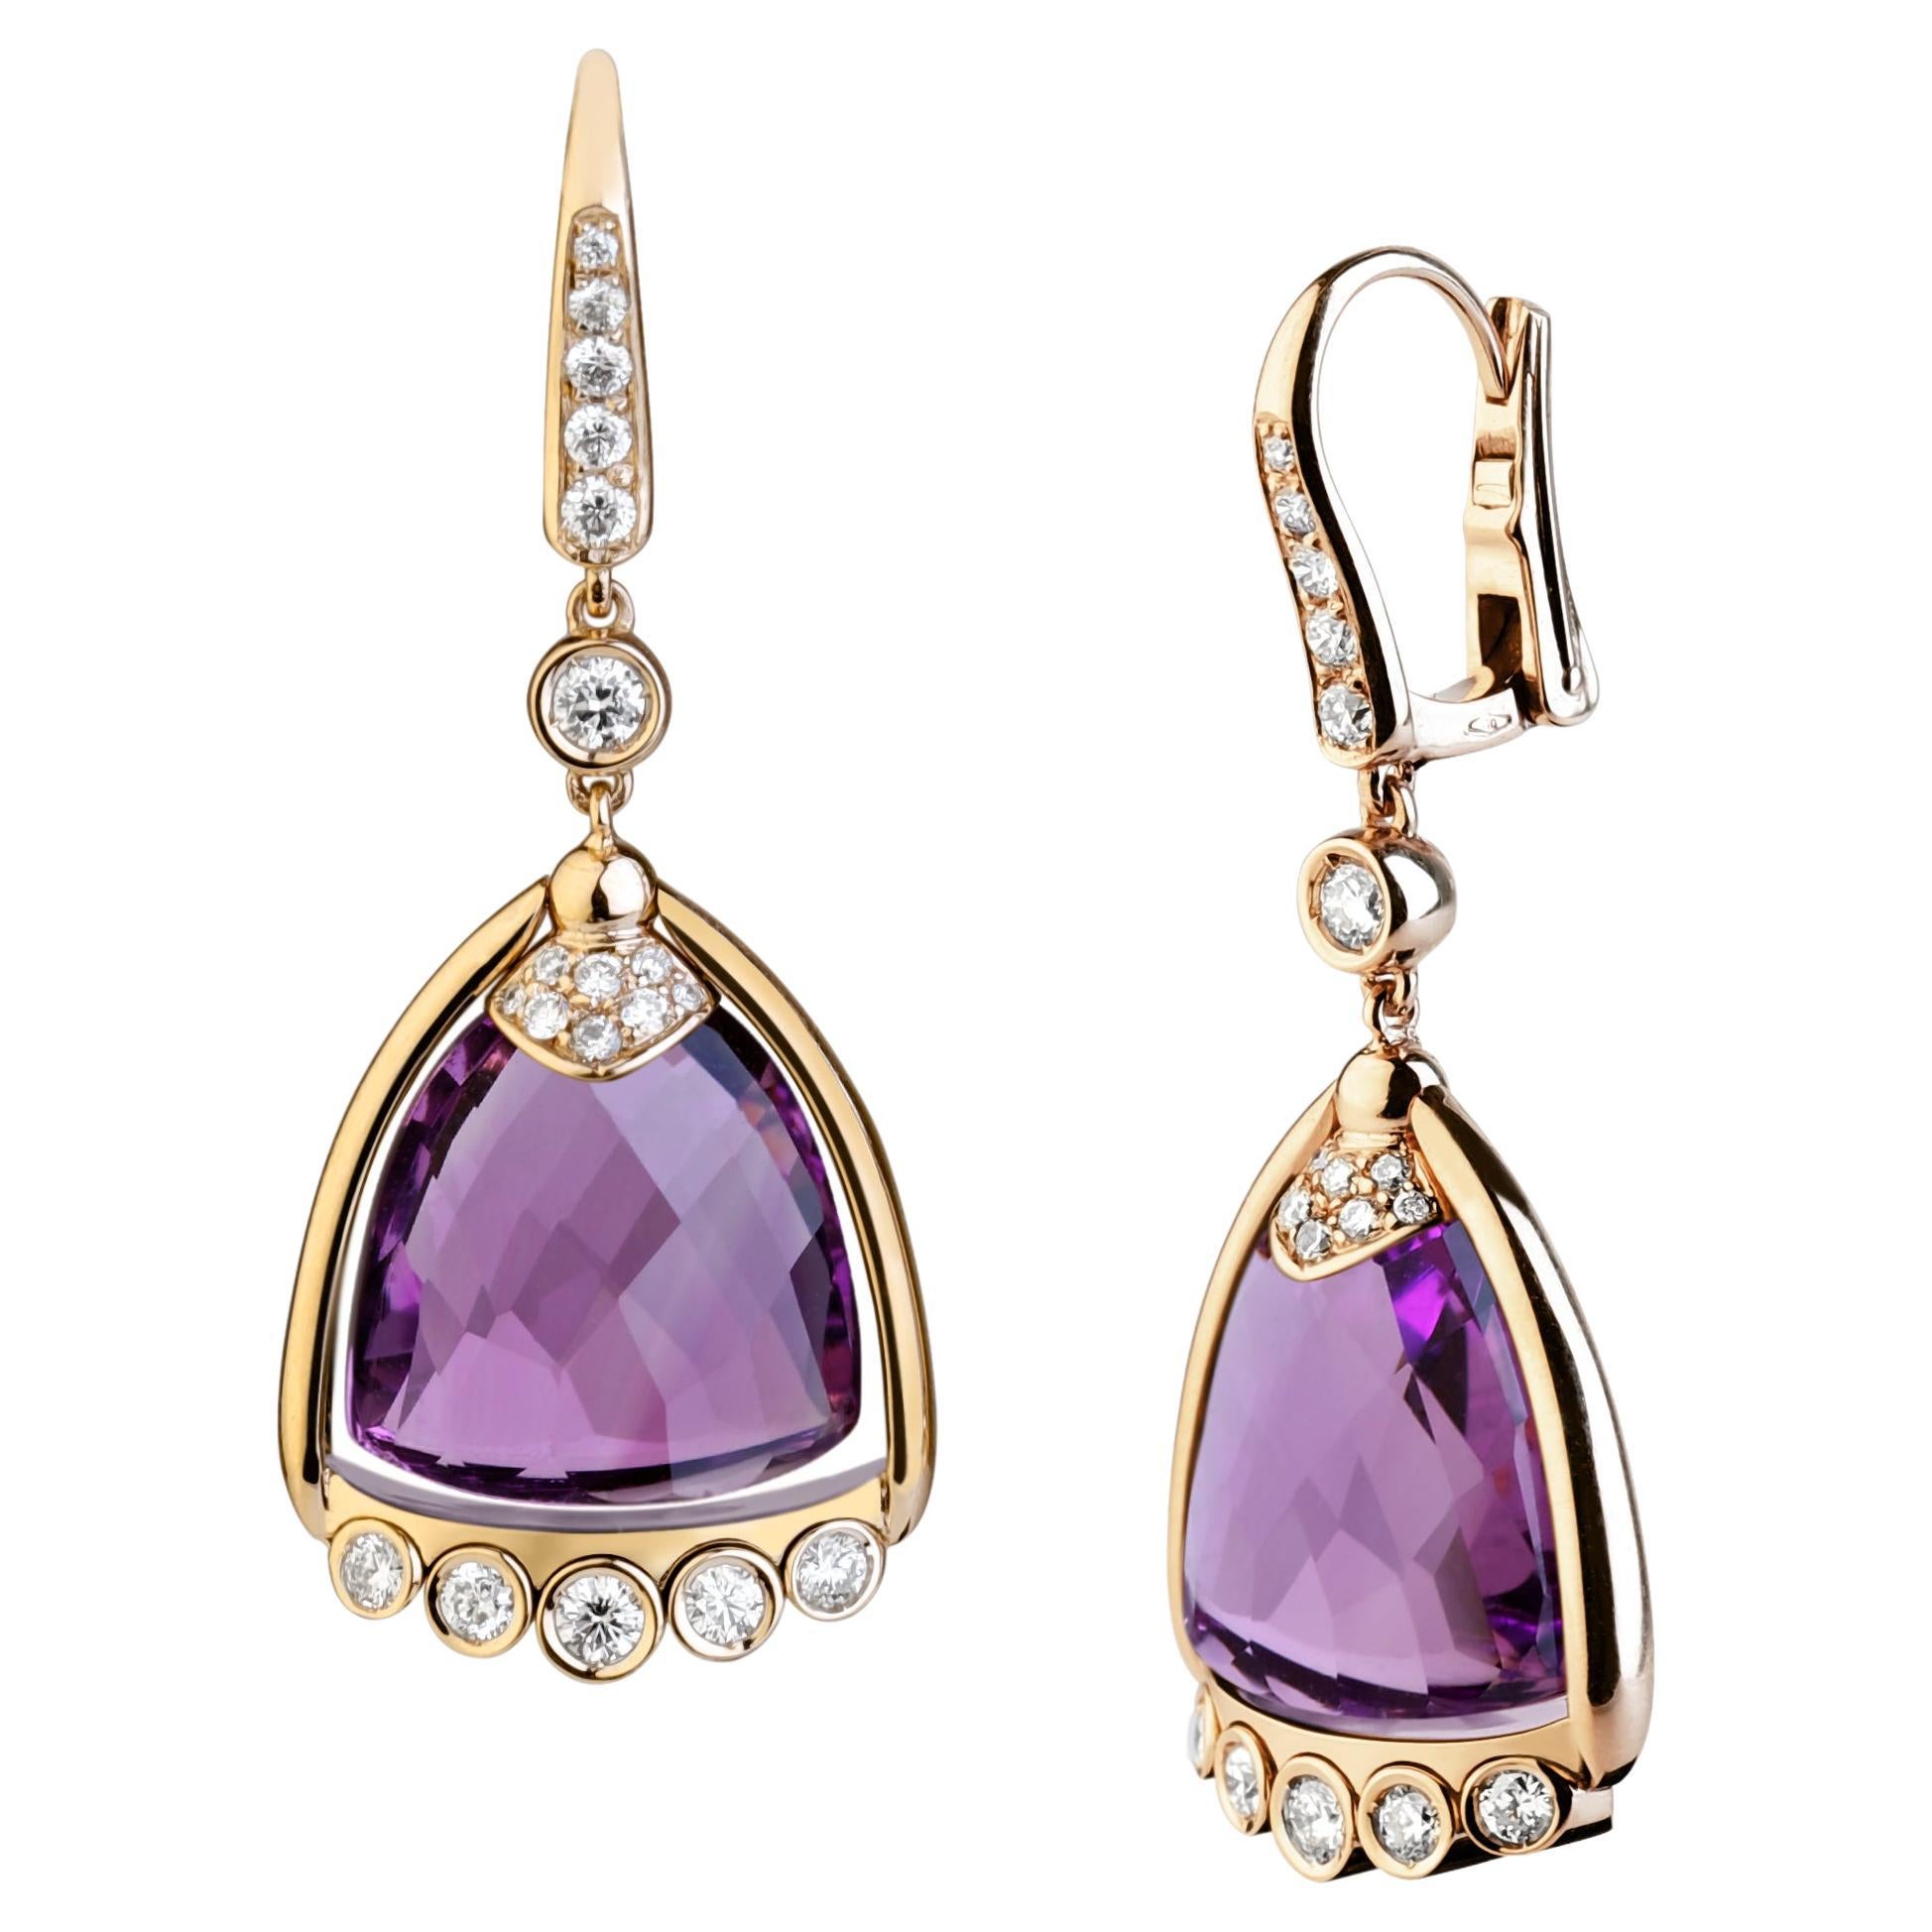 Bell Collection by Angeletti, Gold Earrings with Amethyst and Diamonds